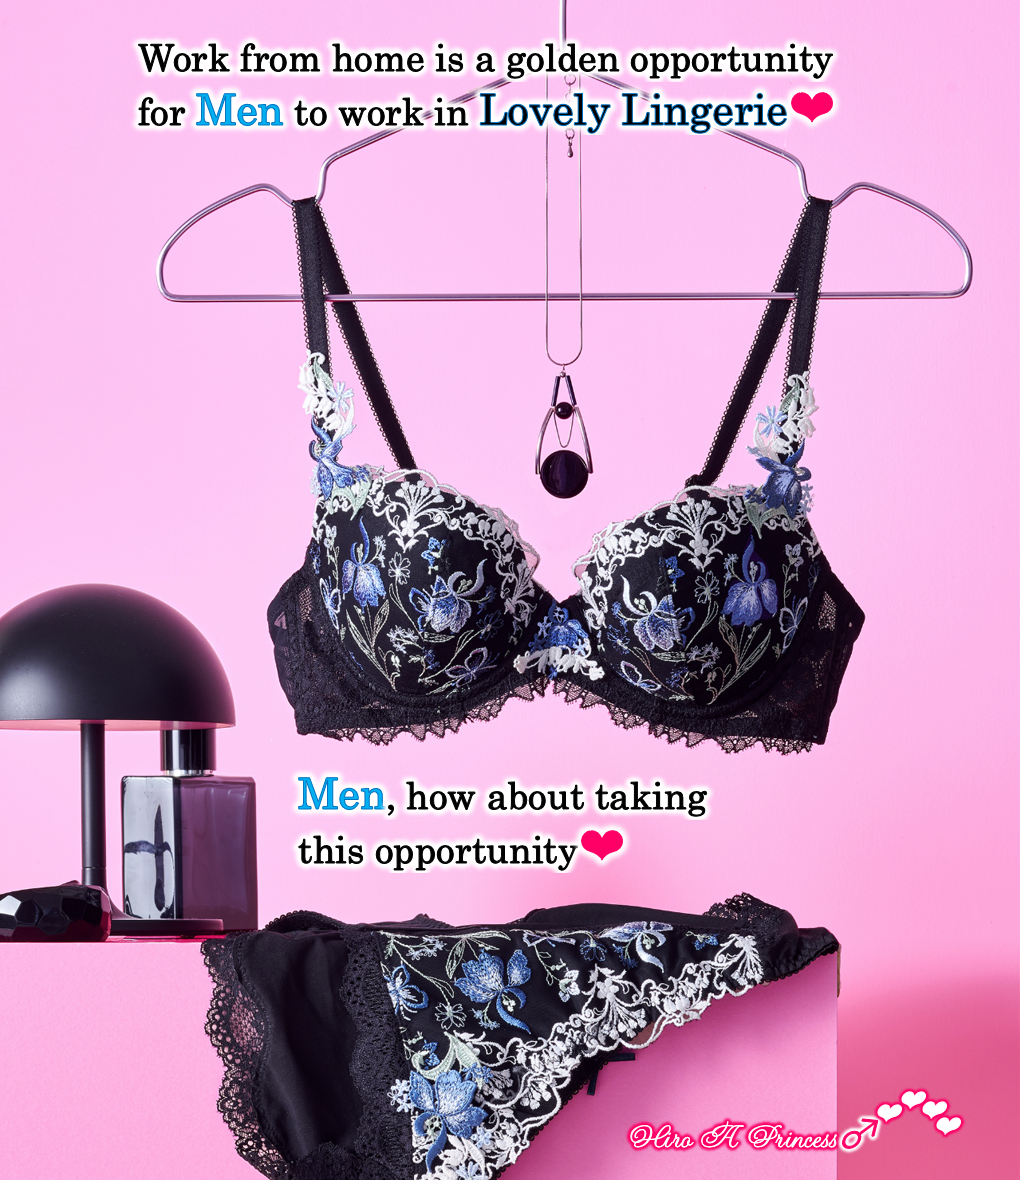 Work from home is a golden opportunity for Men to work in Lovely Lingerie E